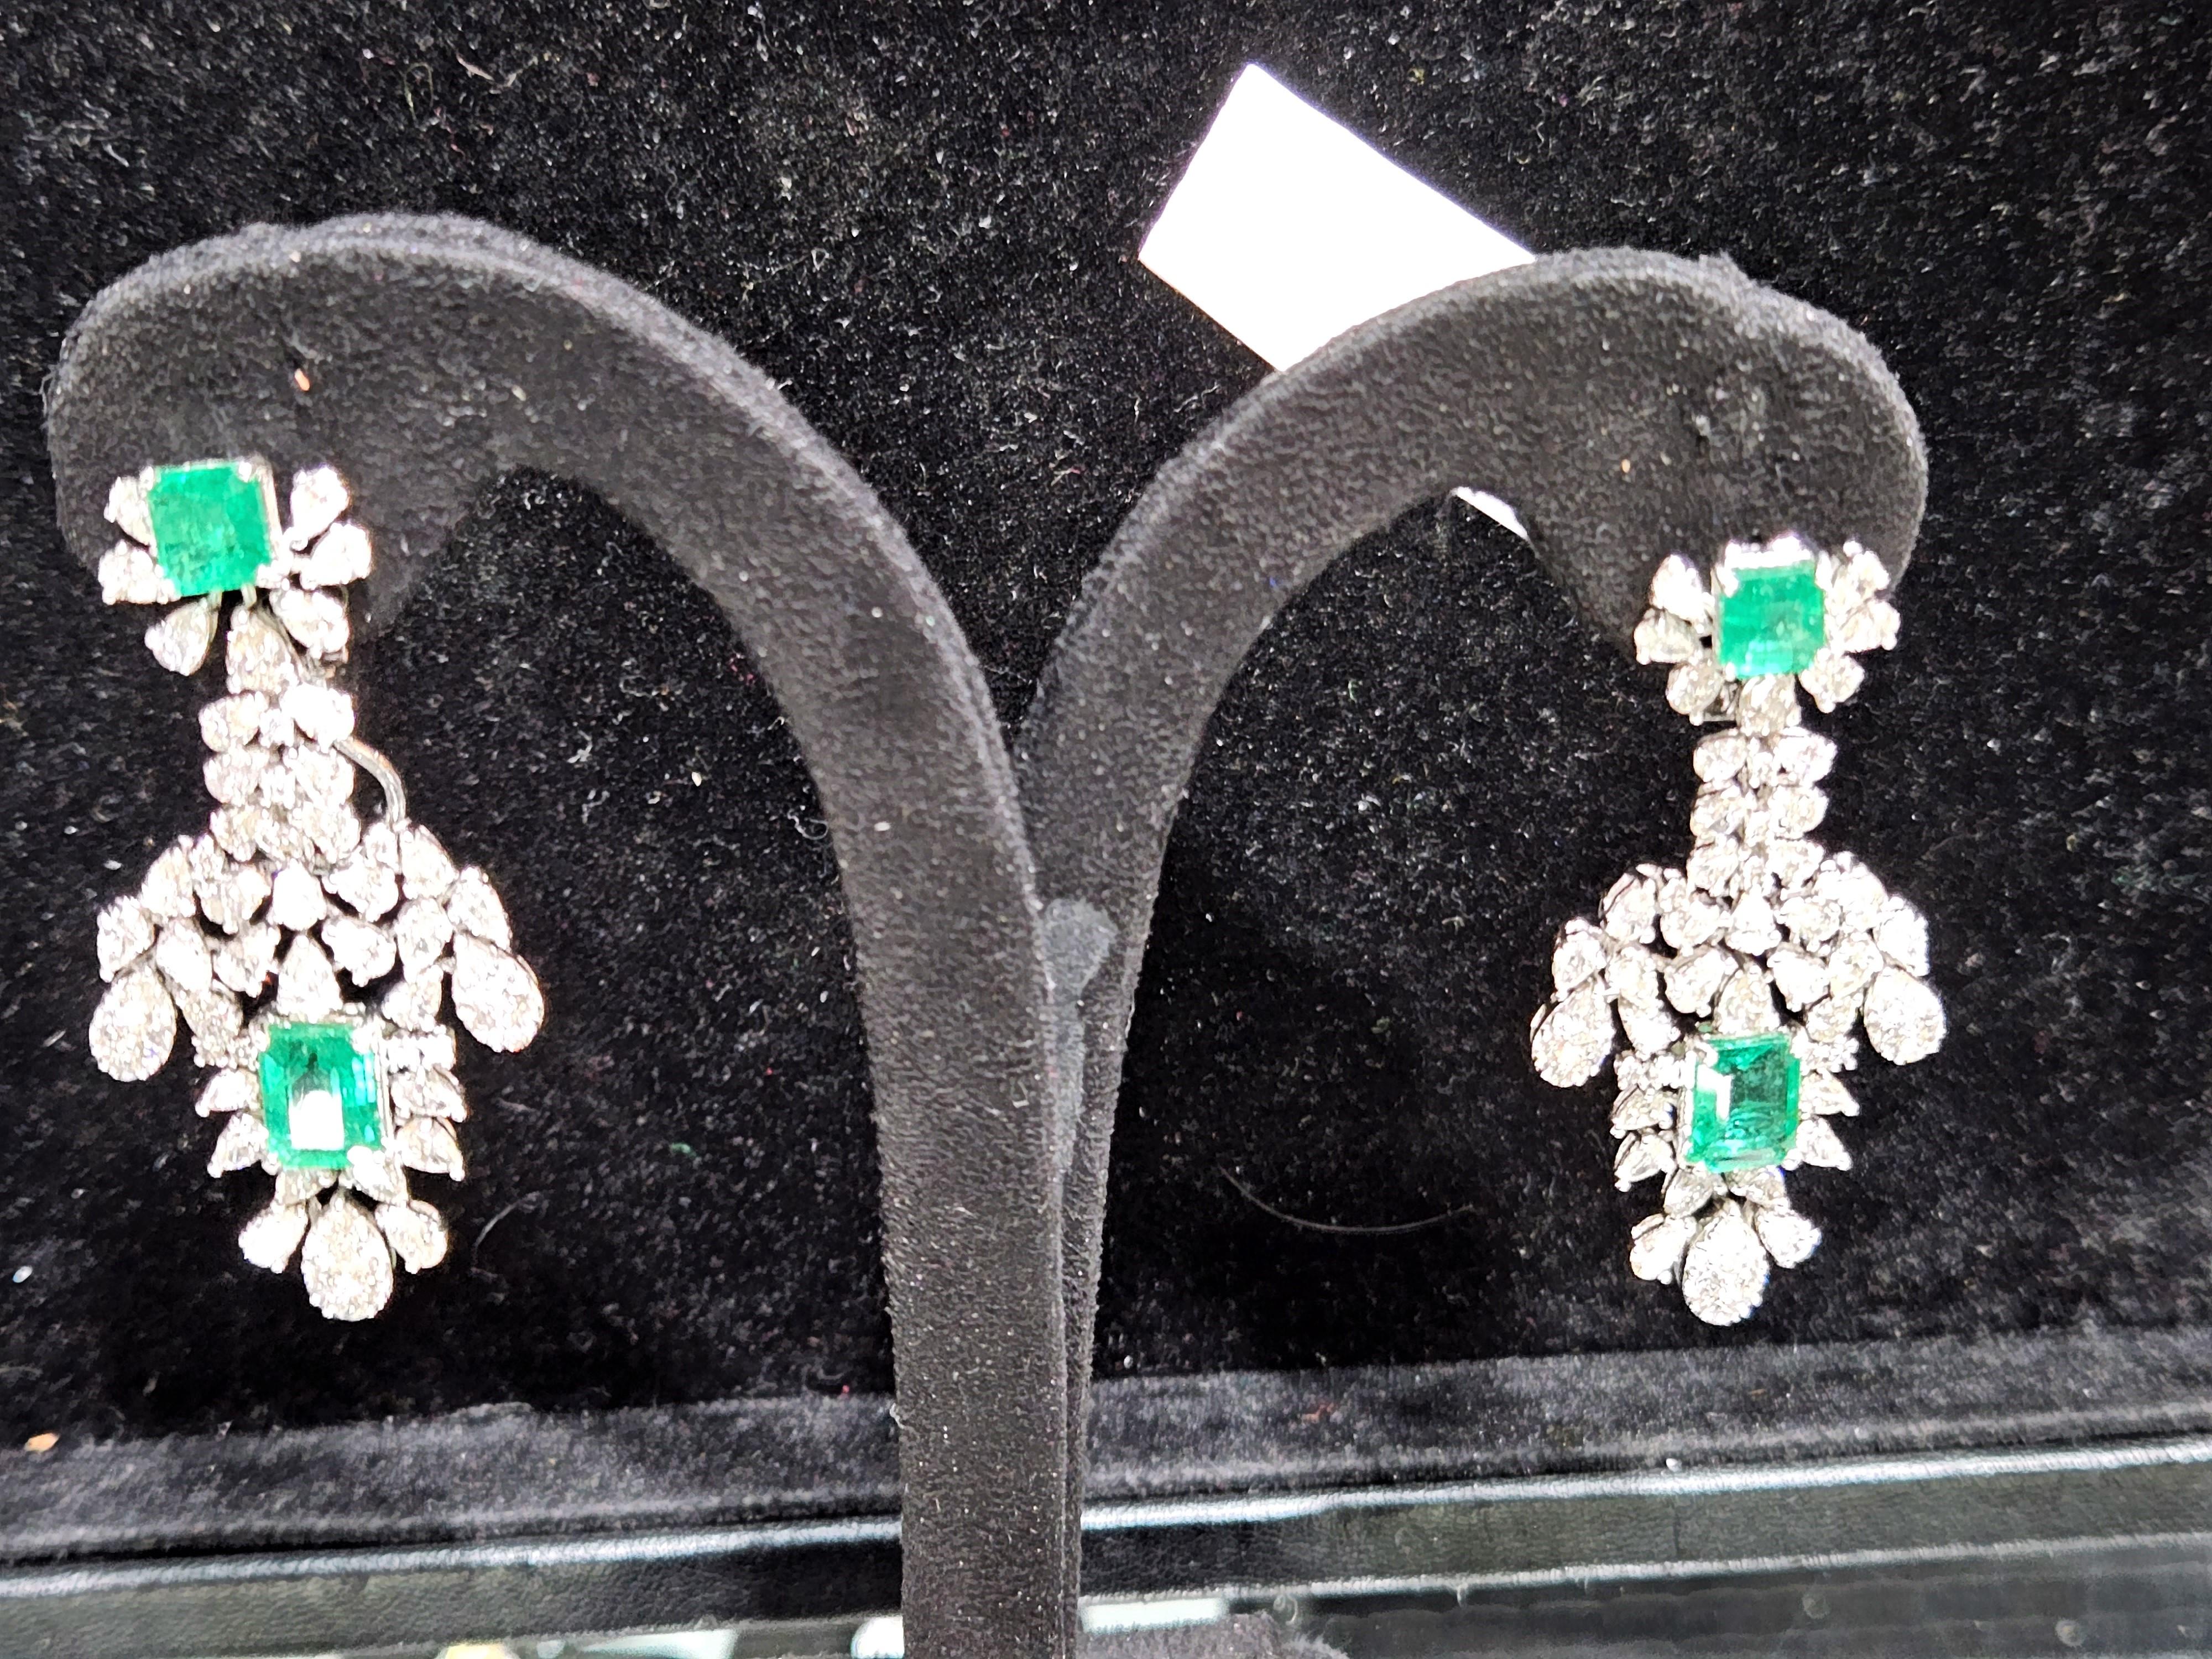 The Following Item we are offering is this Rare Important Radiant White Gold Gorgeous Glittering and Sparkling Magnificent Fancy Emerald and Baguette Diamond Dangle Earrings. Earrings contain approx 13CTS of Beautiful Rare Fancy Emeralds and